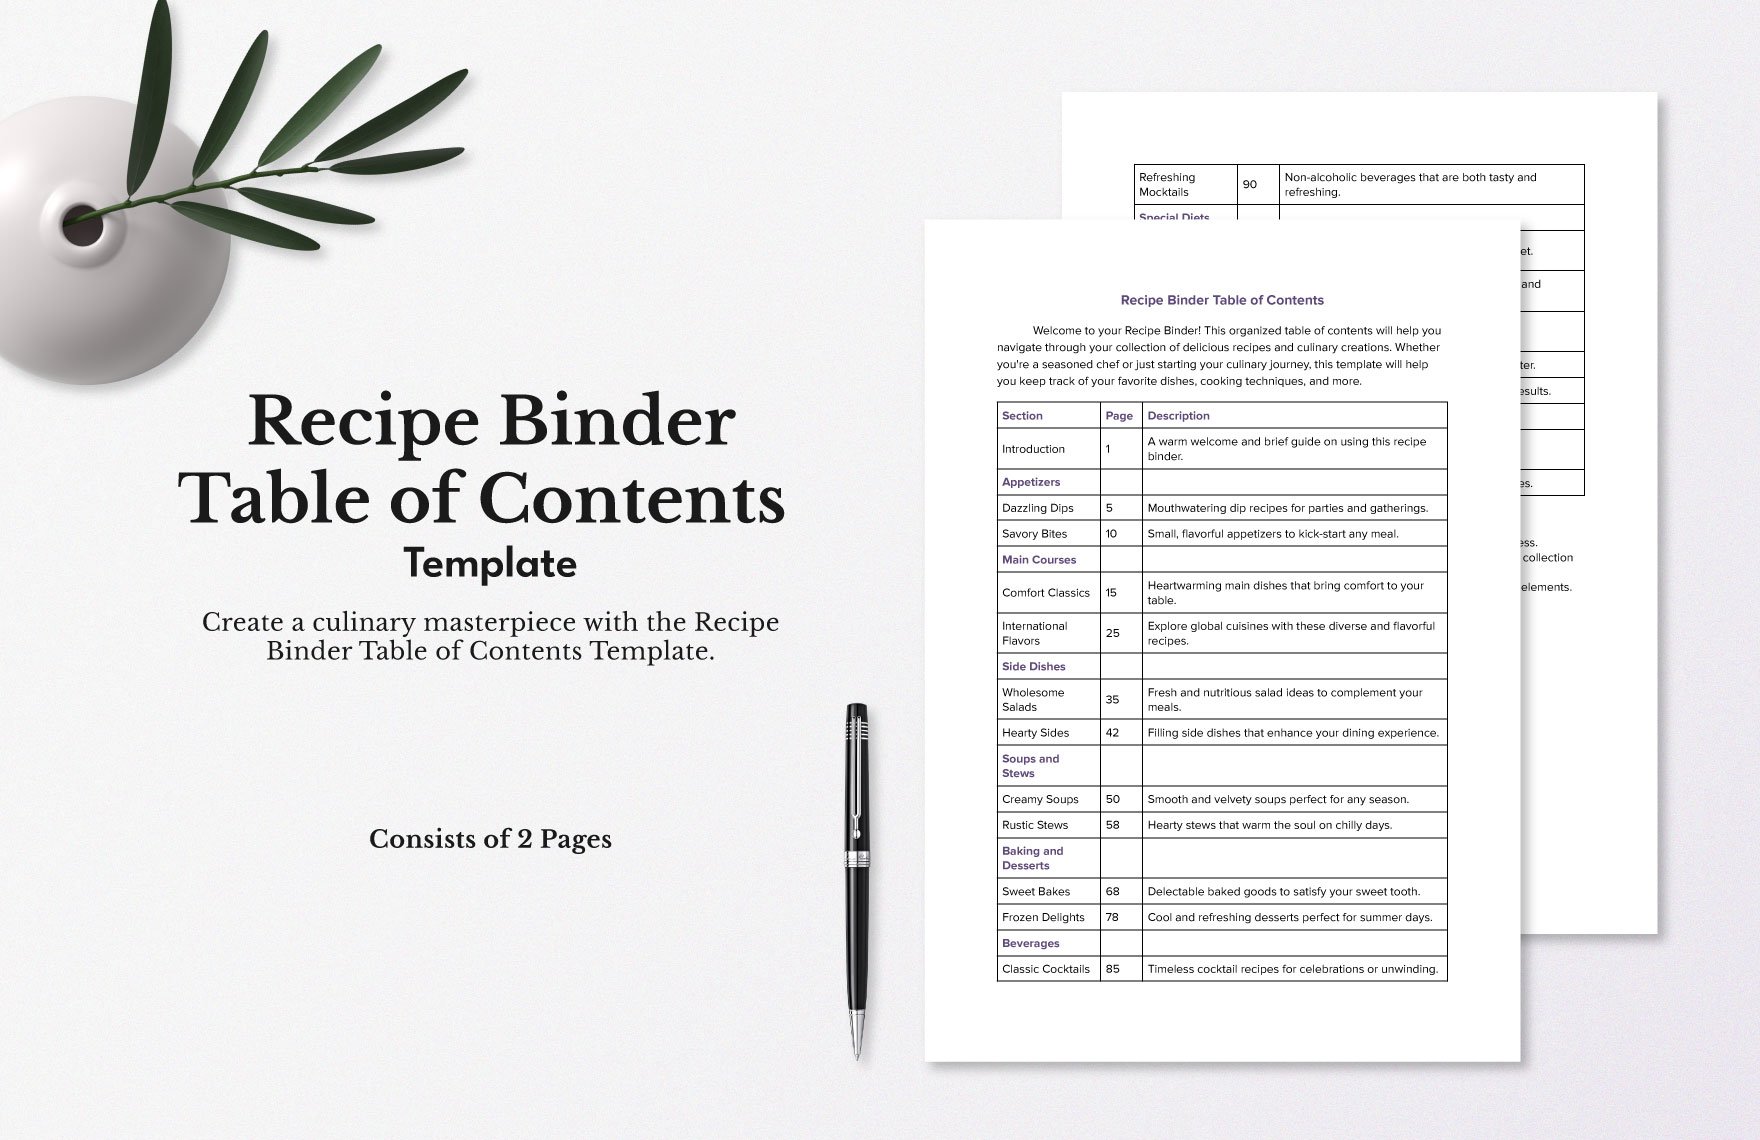 Recipe Binder Table of Contents Template